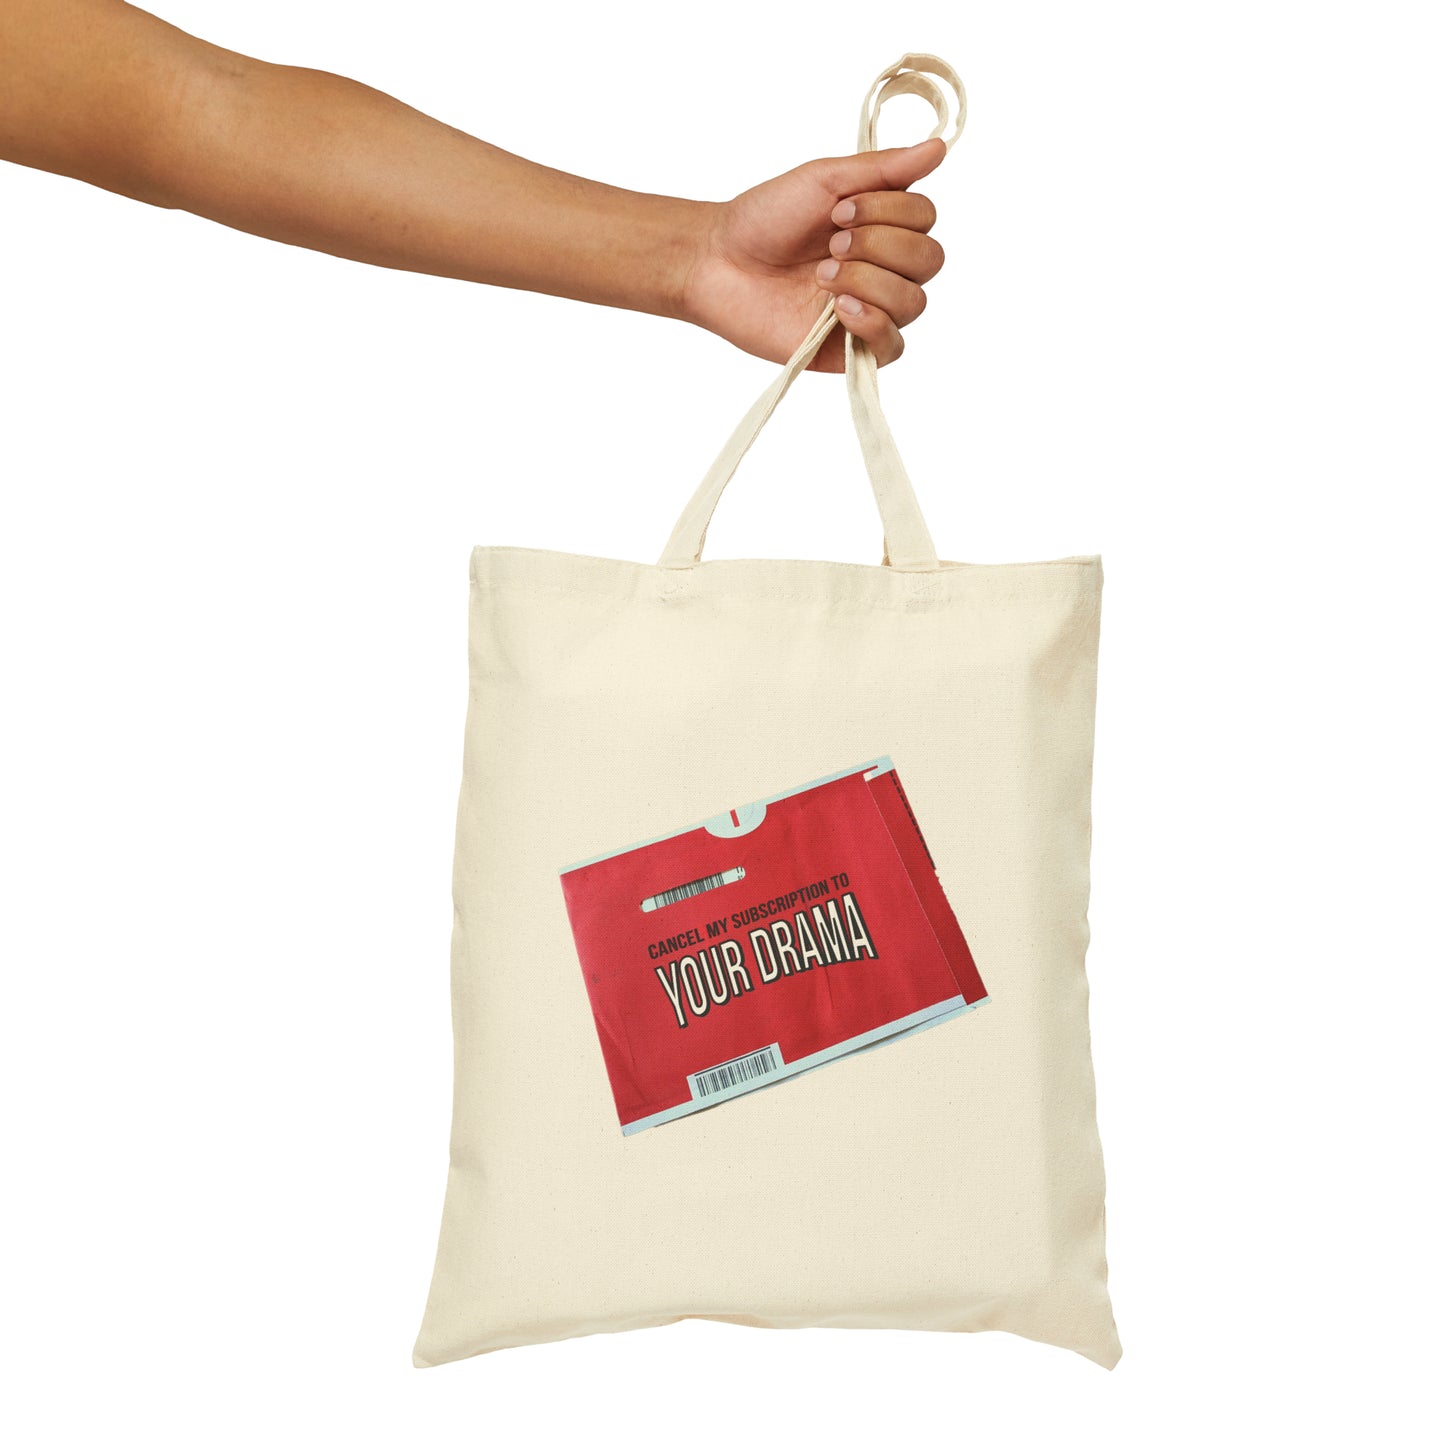 Cancel My Subscription To Your Drama - Cotton Canvas Tote Bag